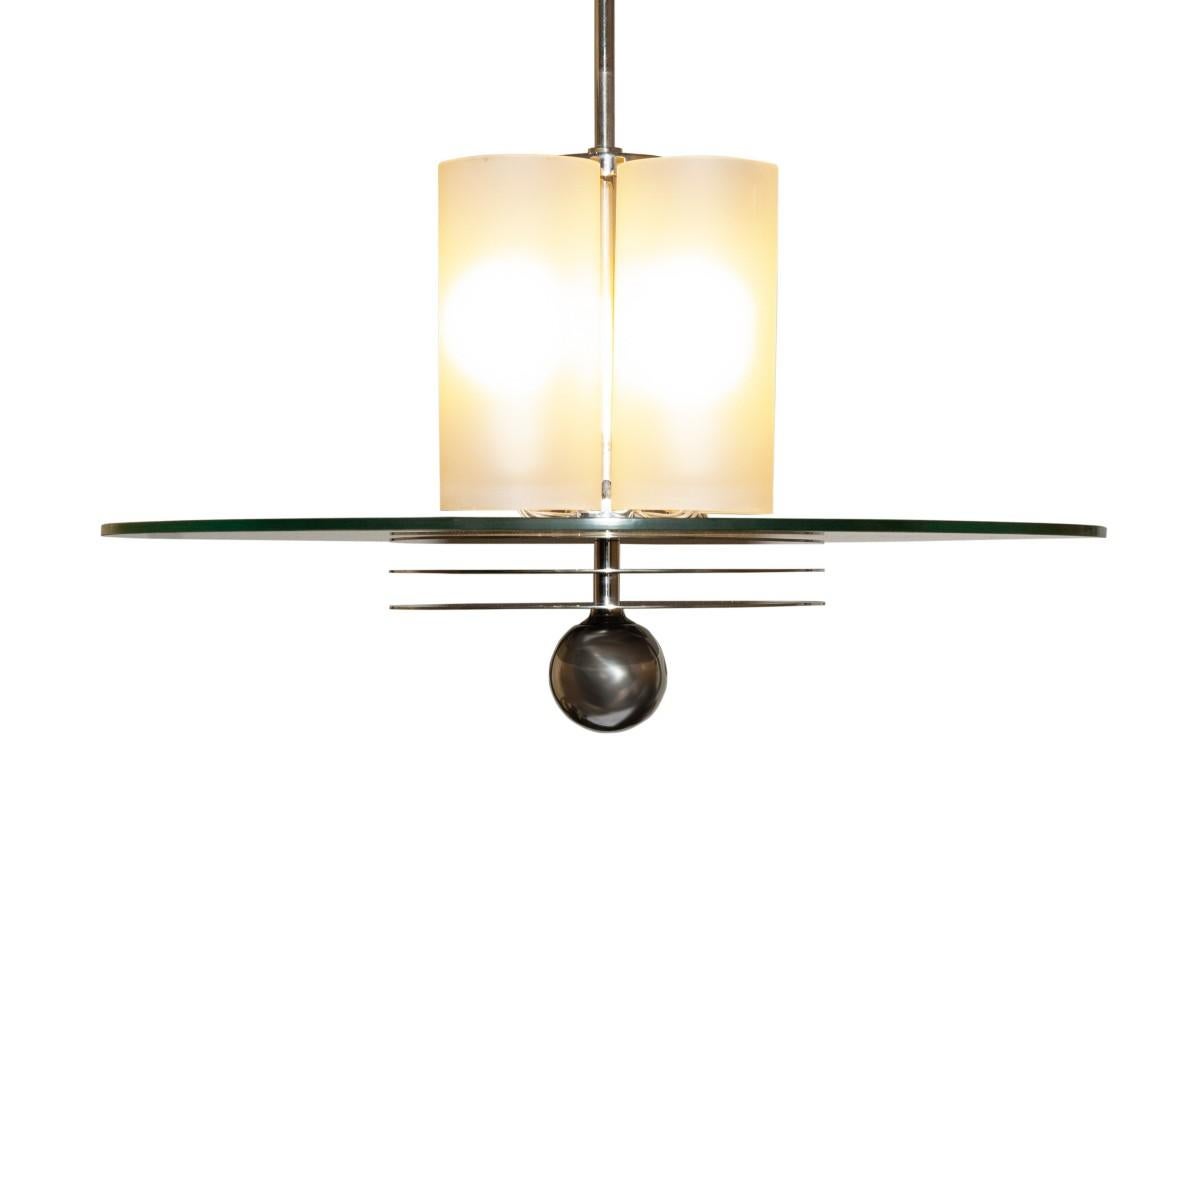 Mid-20th Century French Art Deco Bunished Nickel and Glass Pendant Light Fixture